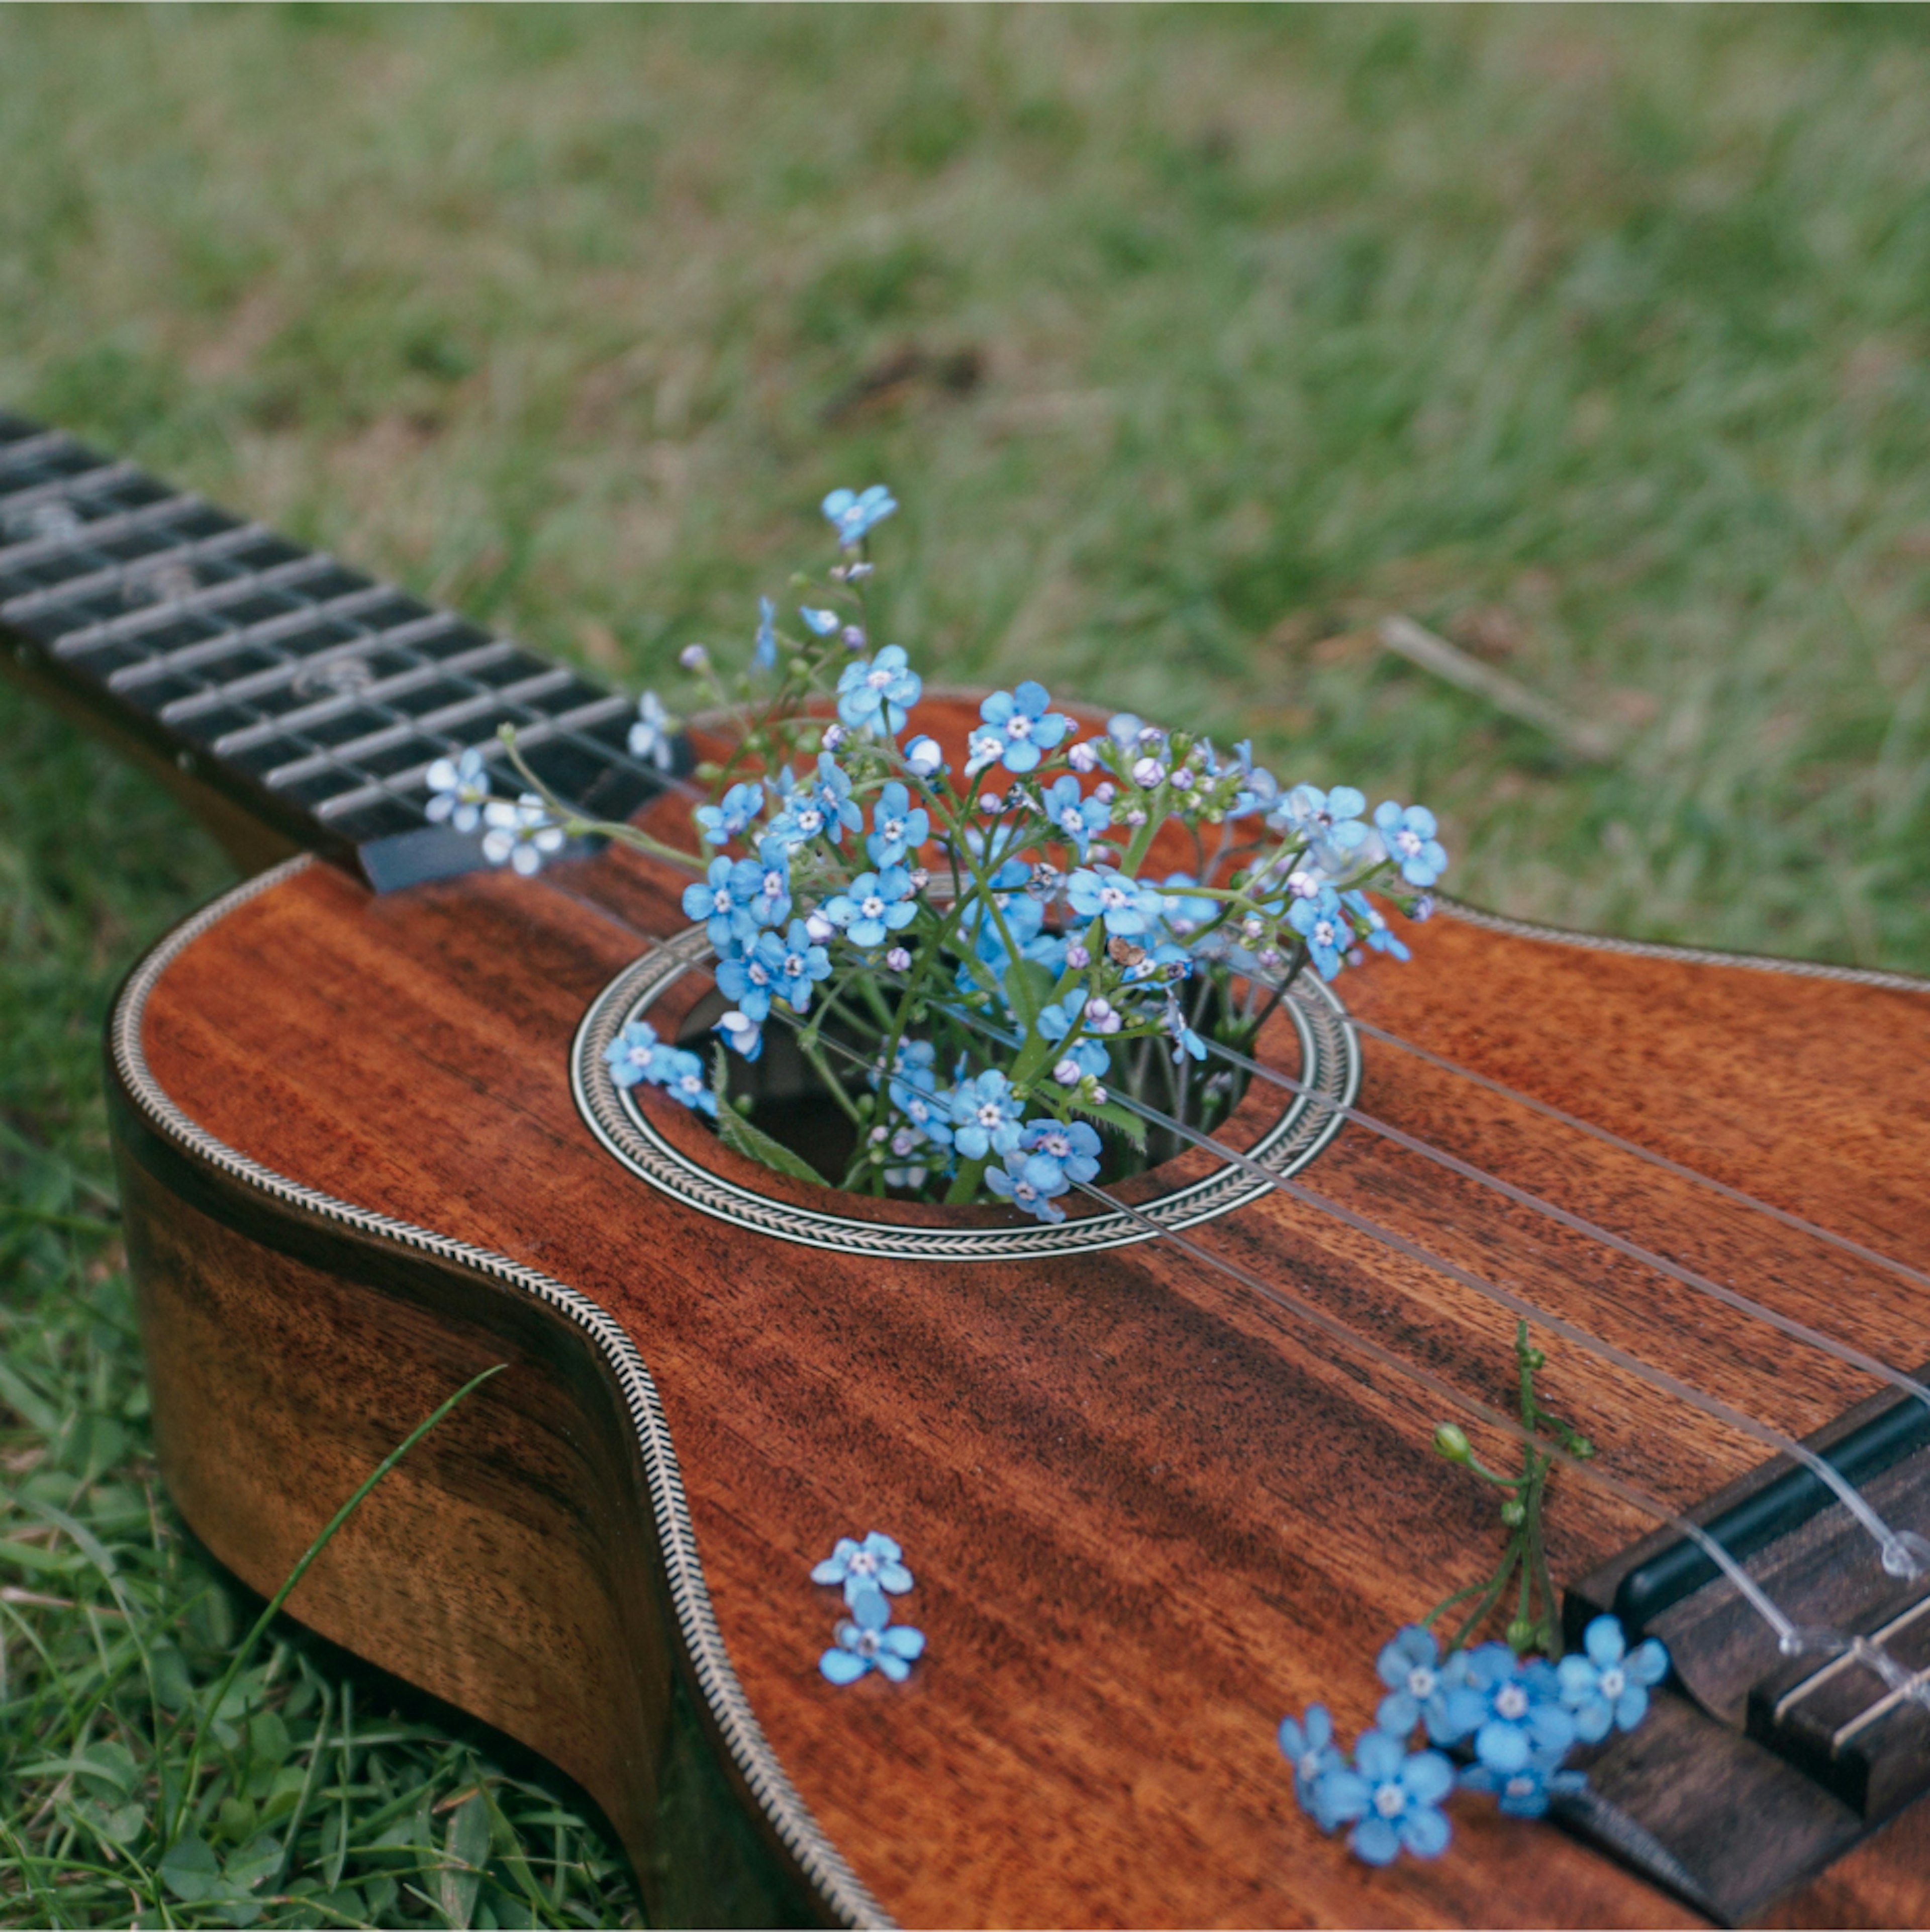 Guitar on grass with blue flowers.